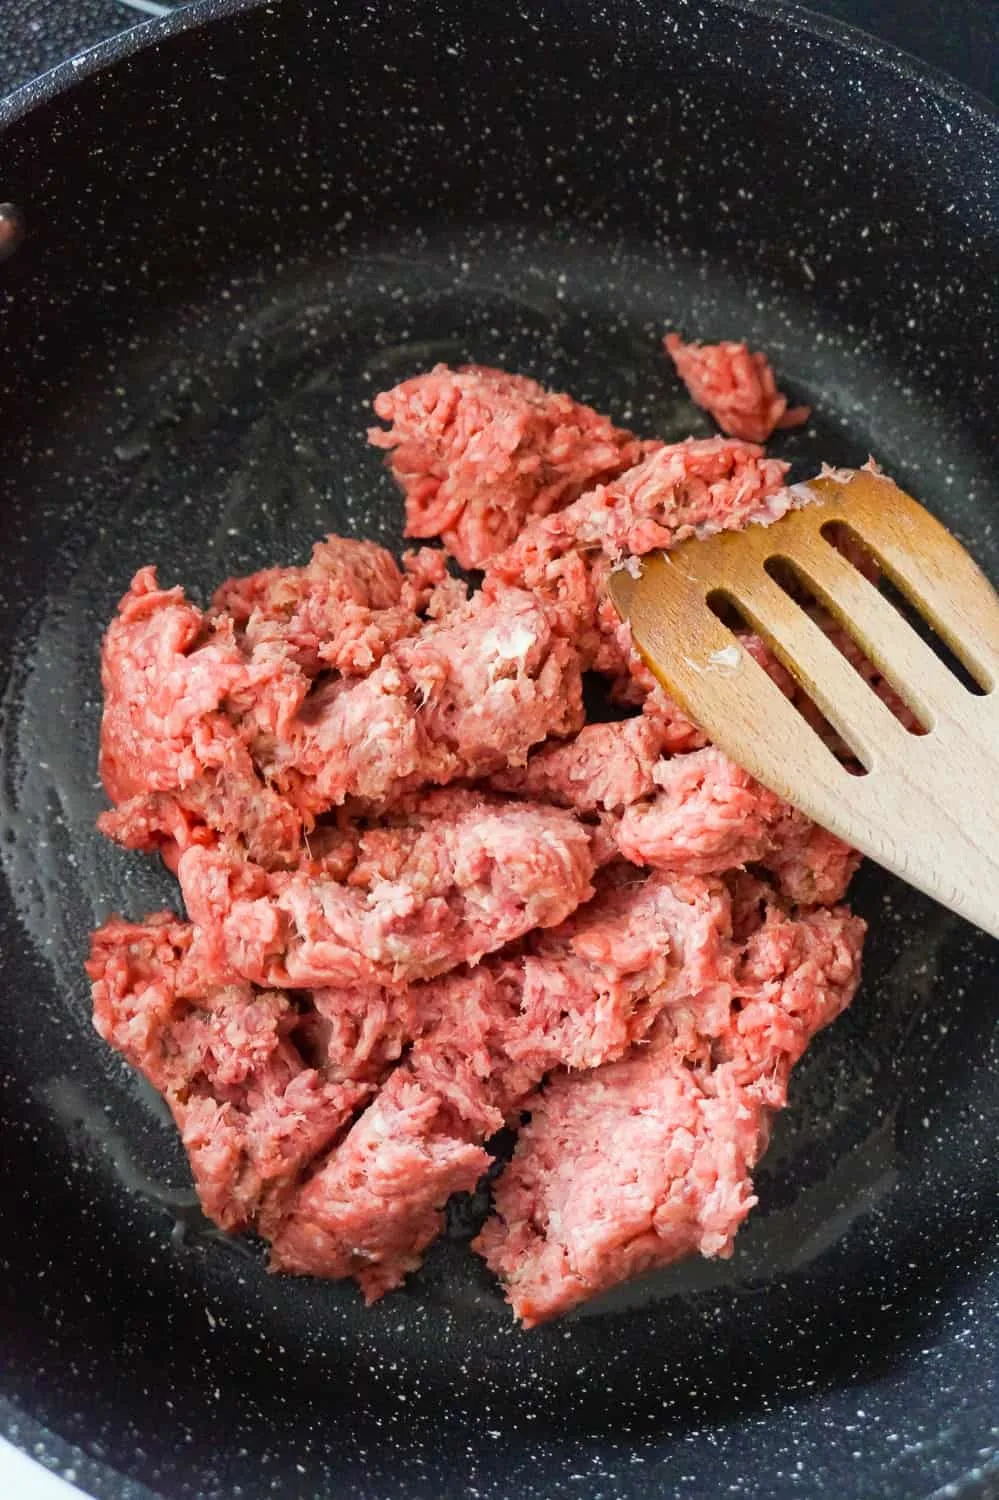 raw ground beef in a saute pan